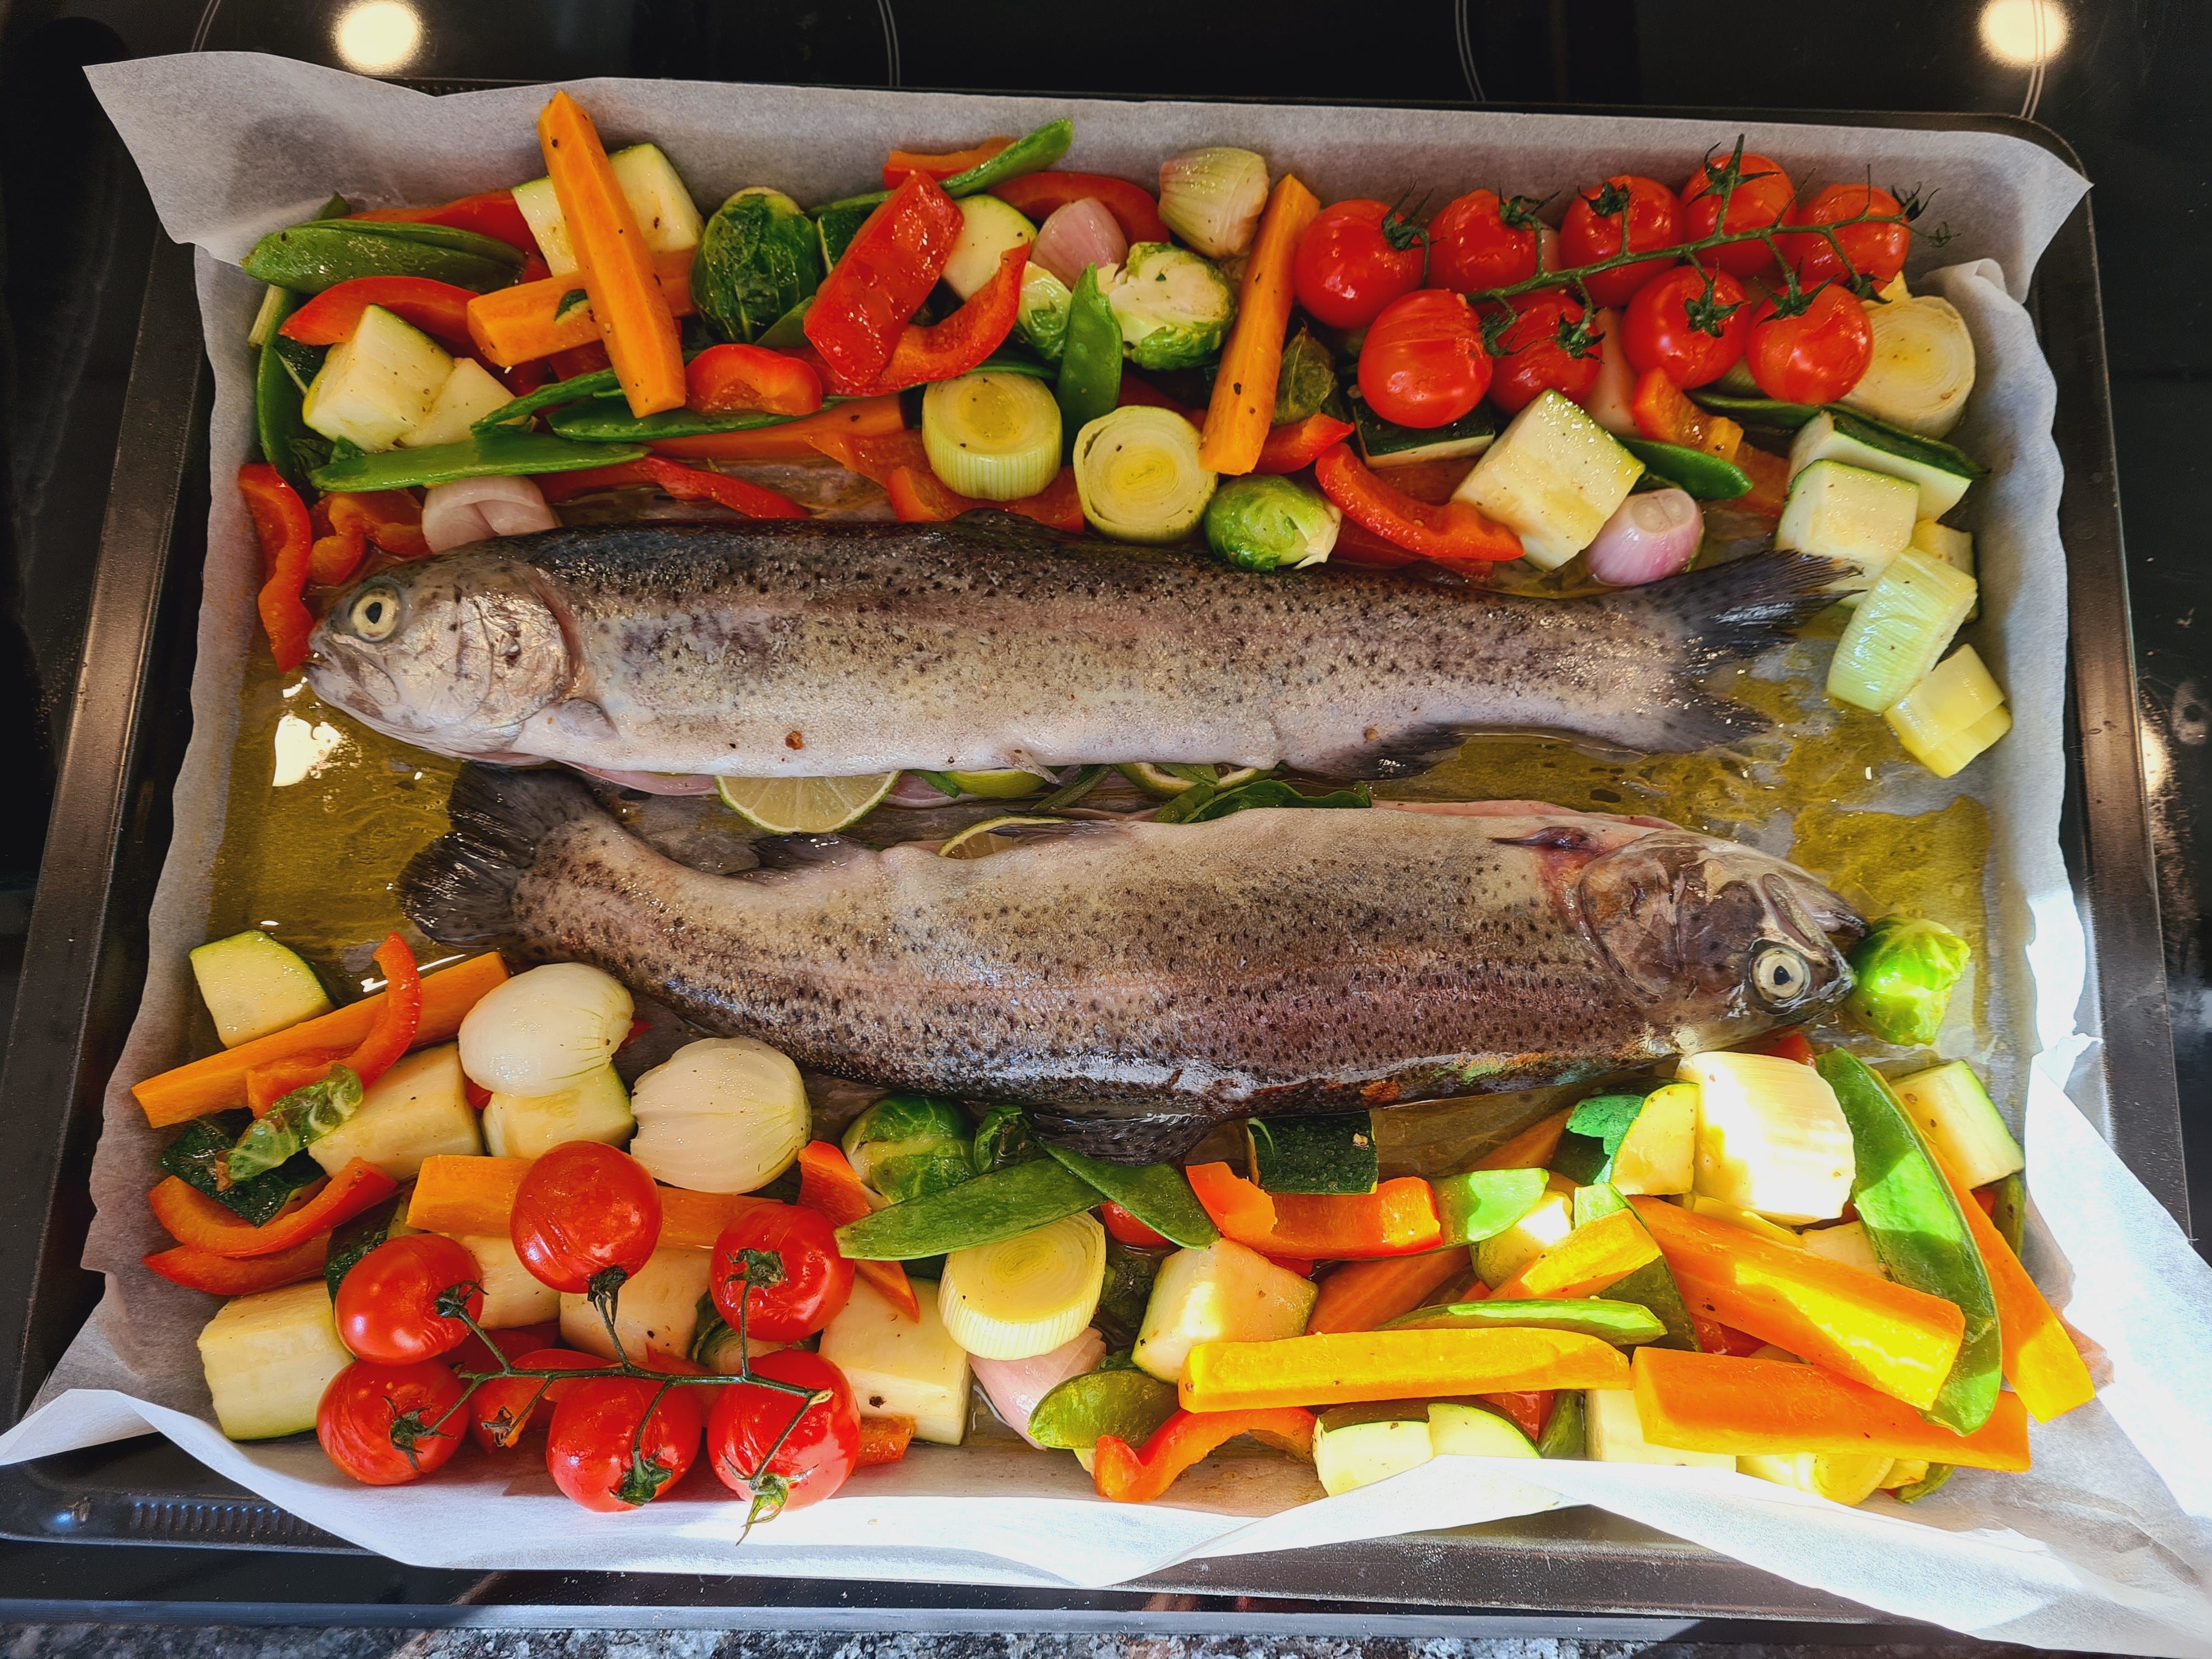 Two fresh whole fish atop a bed of mixed vegetables ready for roasting